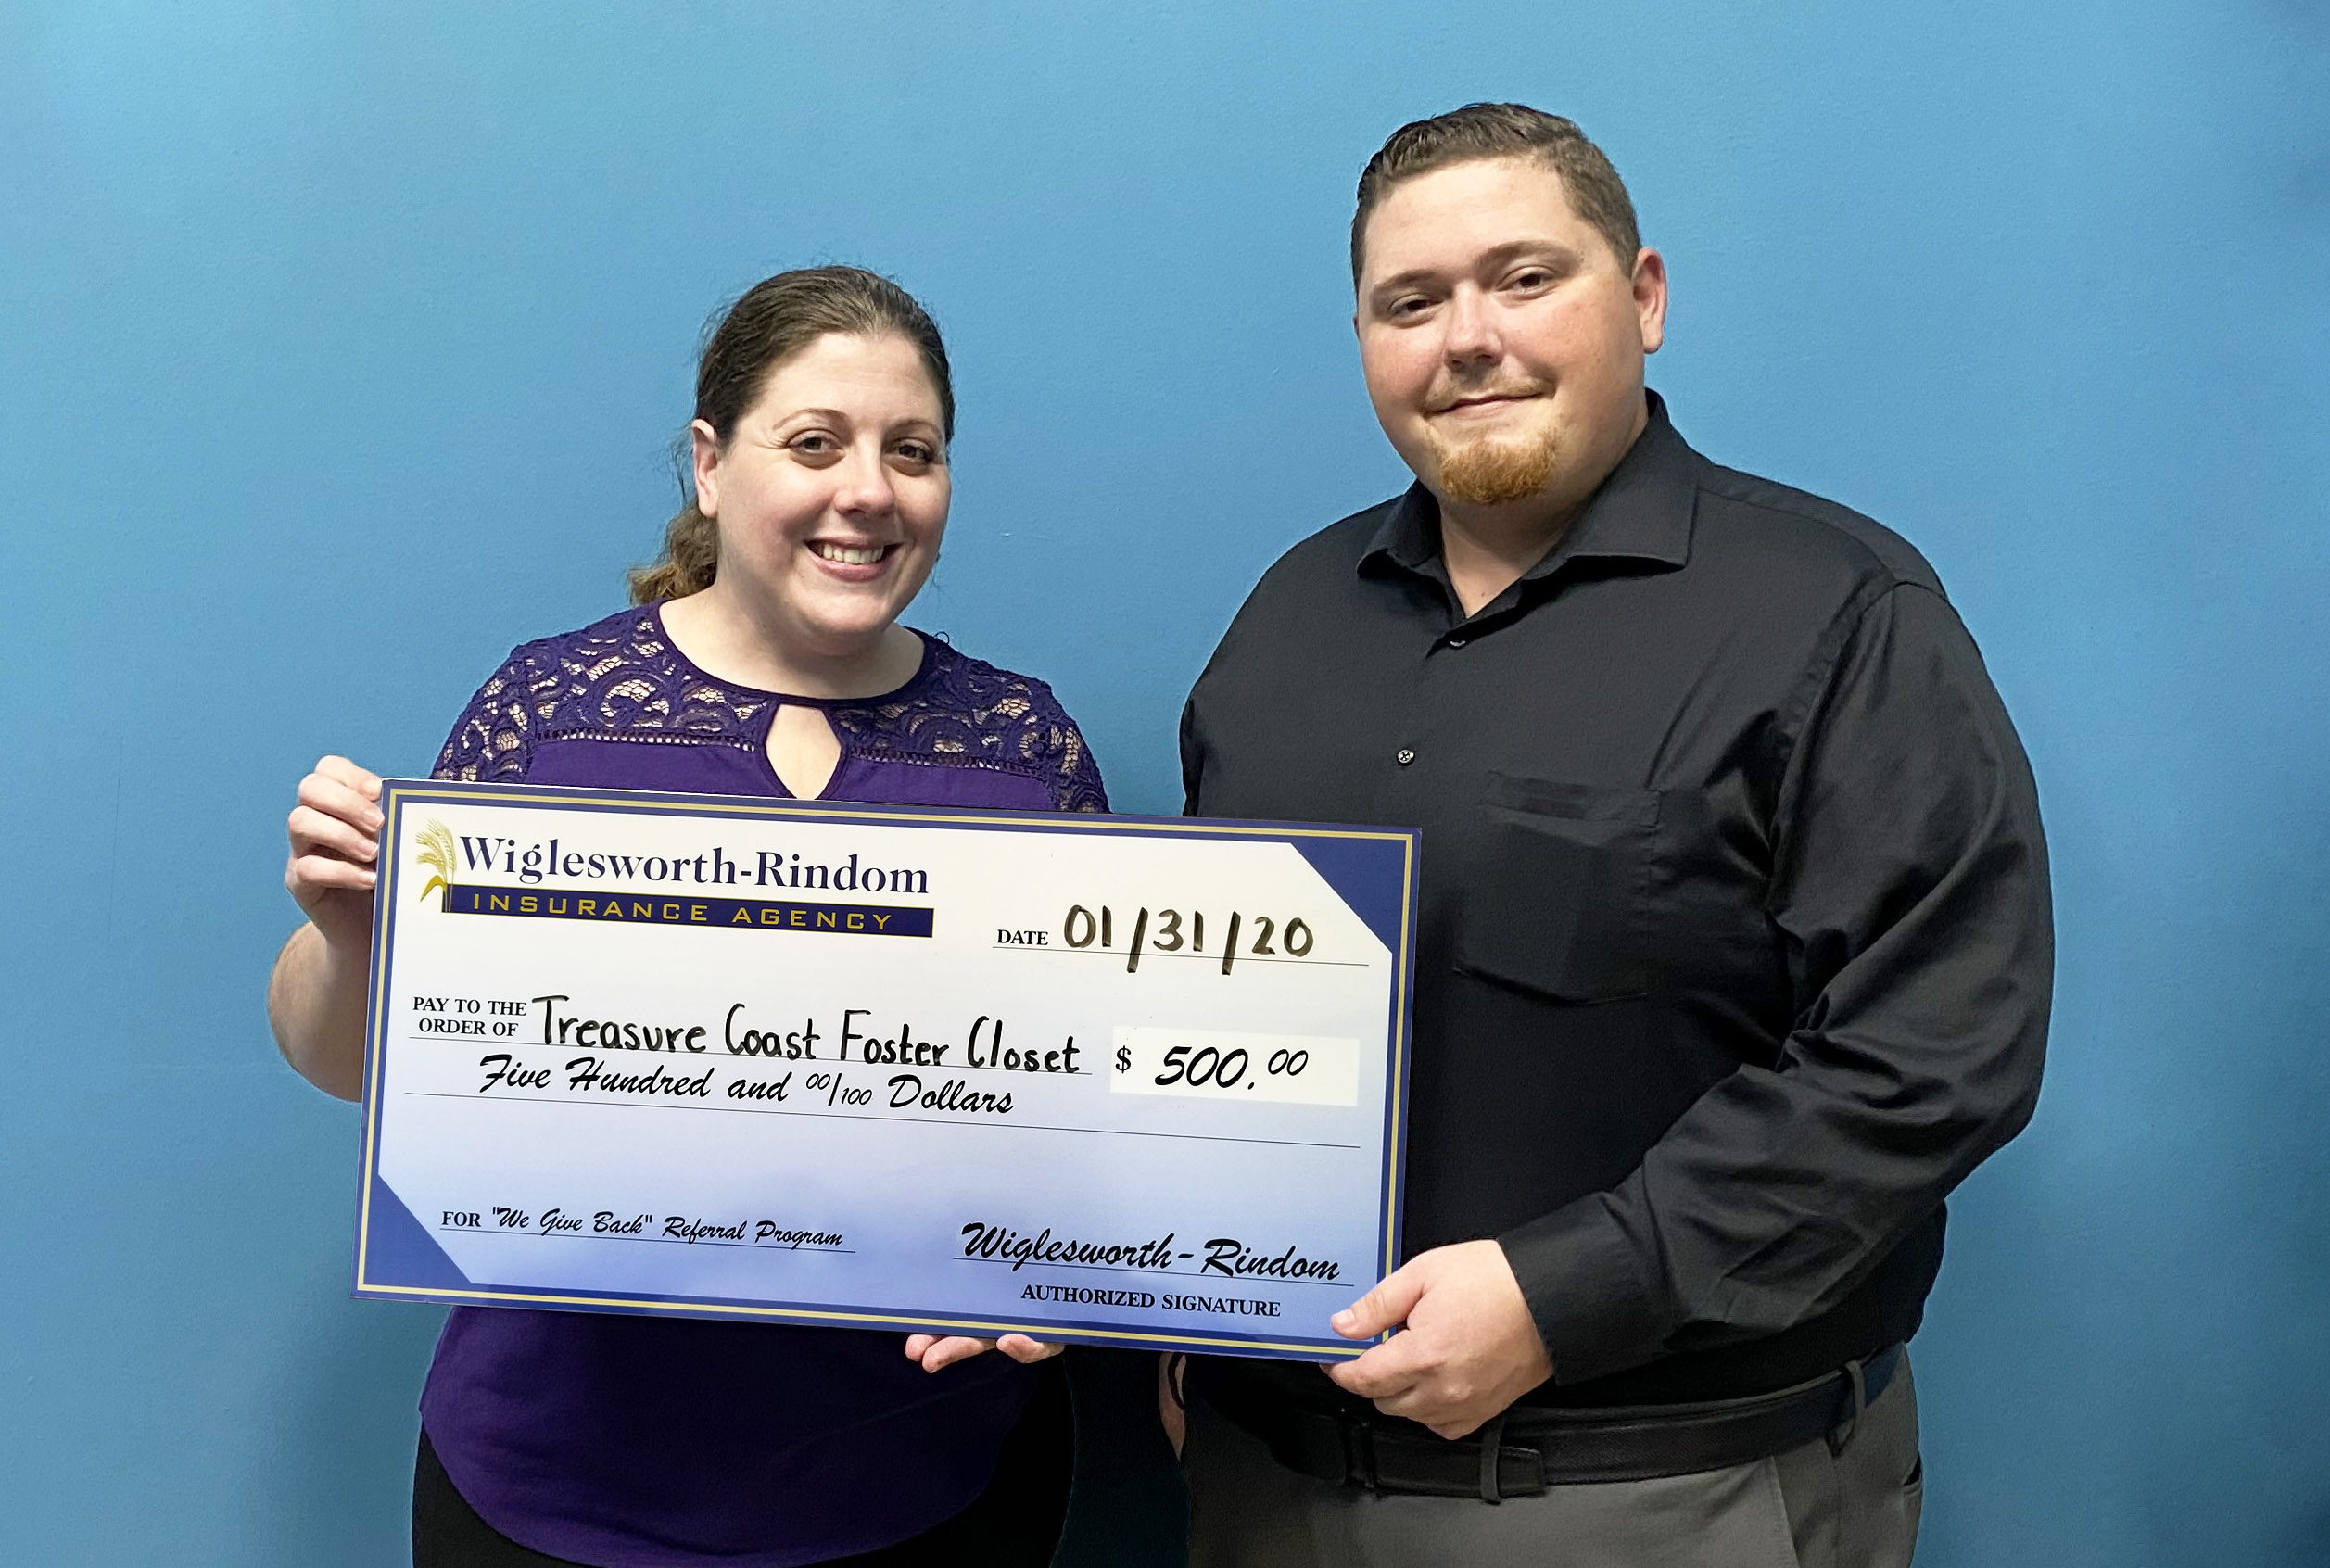 Tara Betancourt posing with a giant check and Insurance Agent Kyle Cocchia